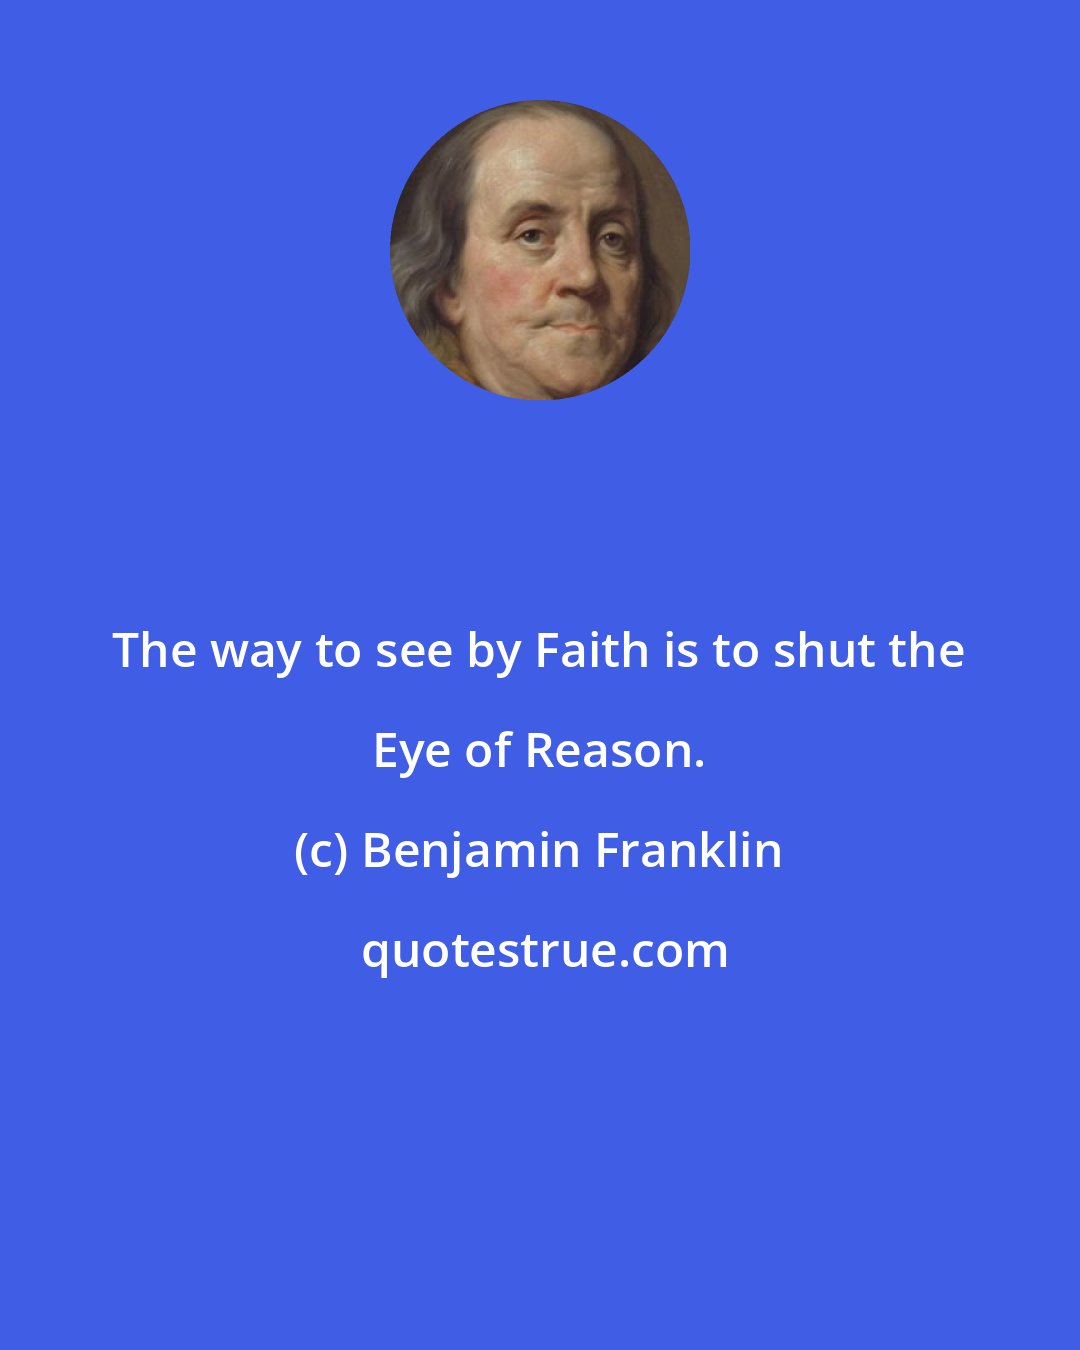 Benjamin Franklin: The way to see by Faith is to shut the Eye of Reason.